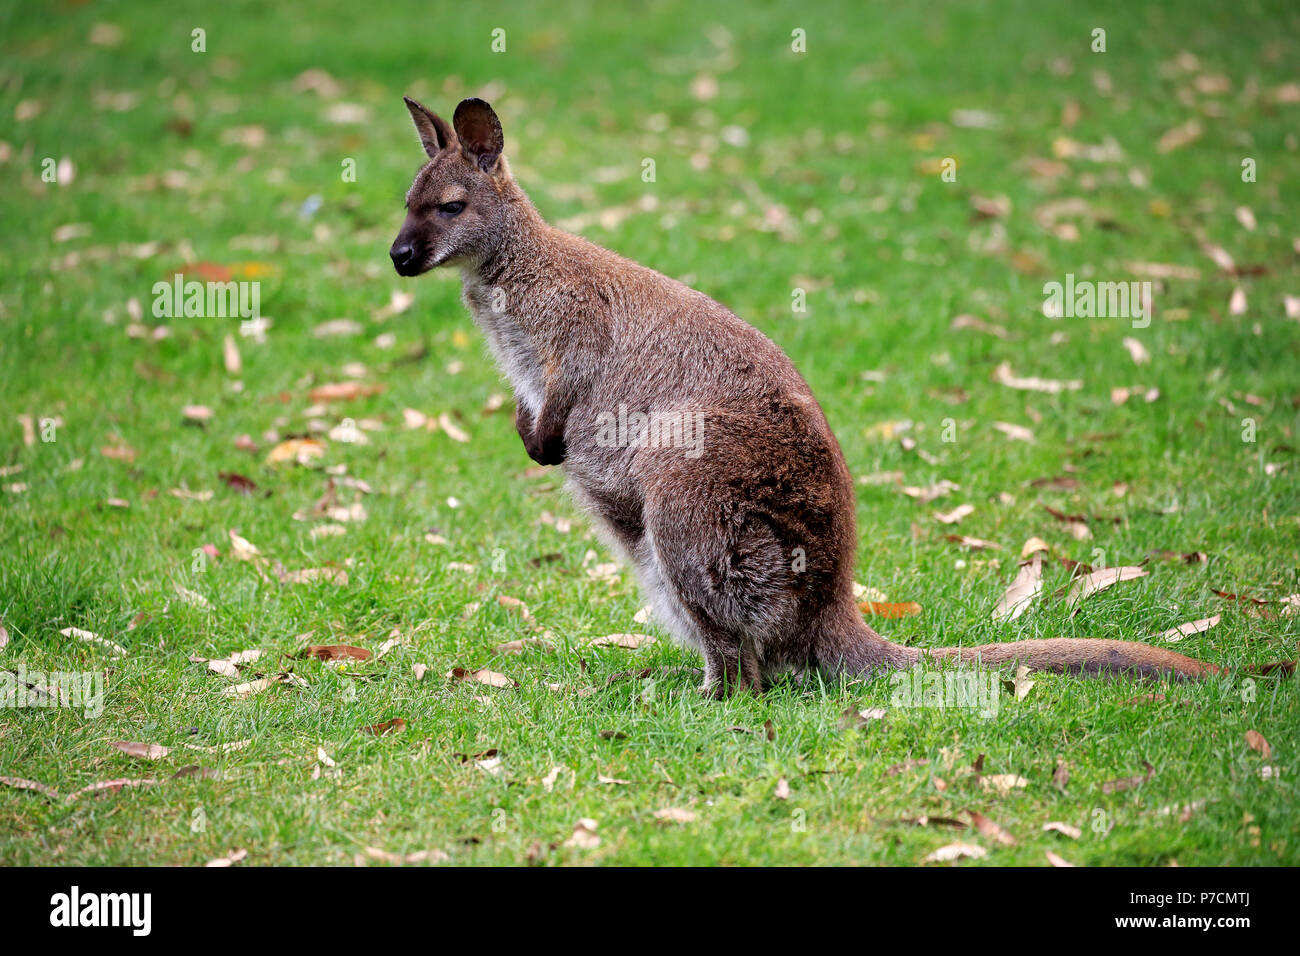 Red-necked wallaby, Bennett Wallaby, adult alert, Cuddly Creek, South Australia, Australia, (Macropus rufogriseus) Stock Photo